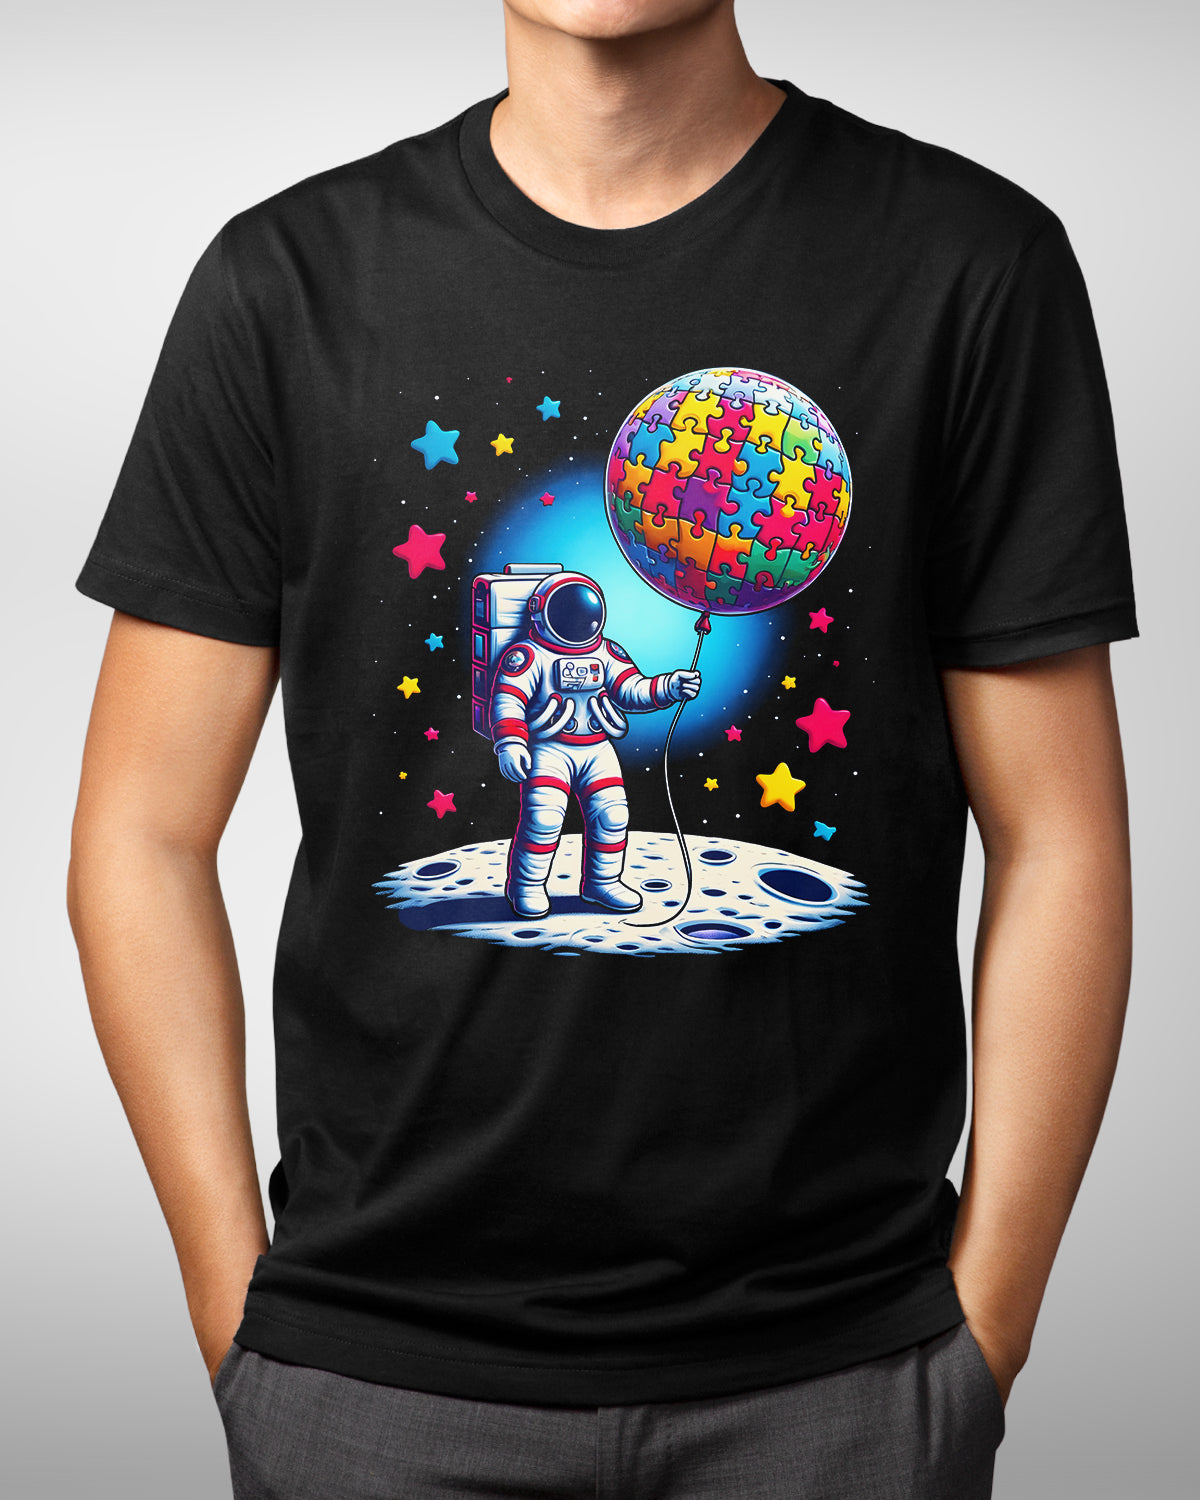 Autism Awareness Space Shirt, Puzzle Piece & Astronaut Tee, Support Neurodiversity, Outer Space Theme, Autistic Boys